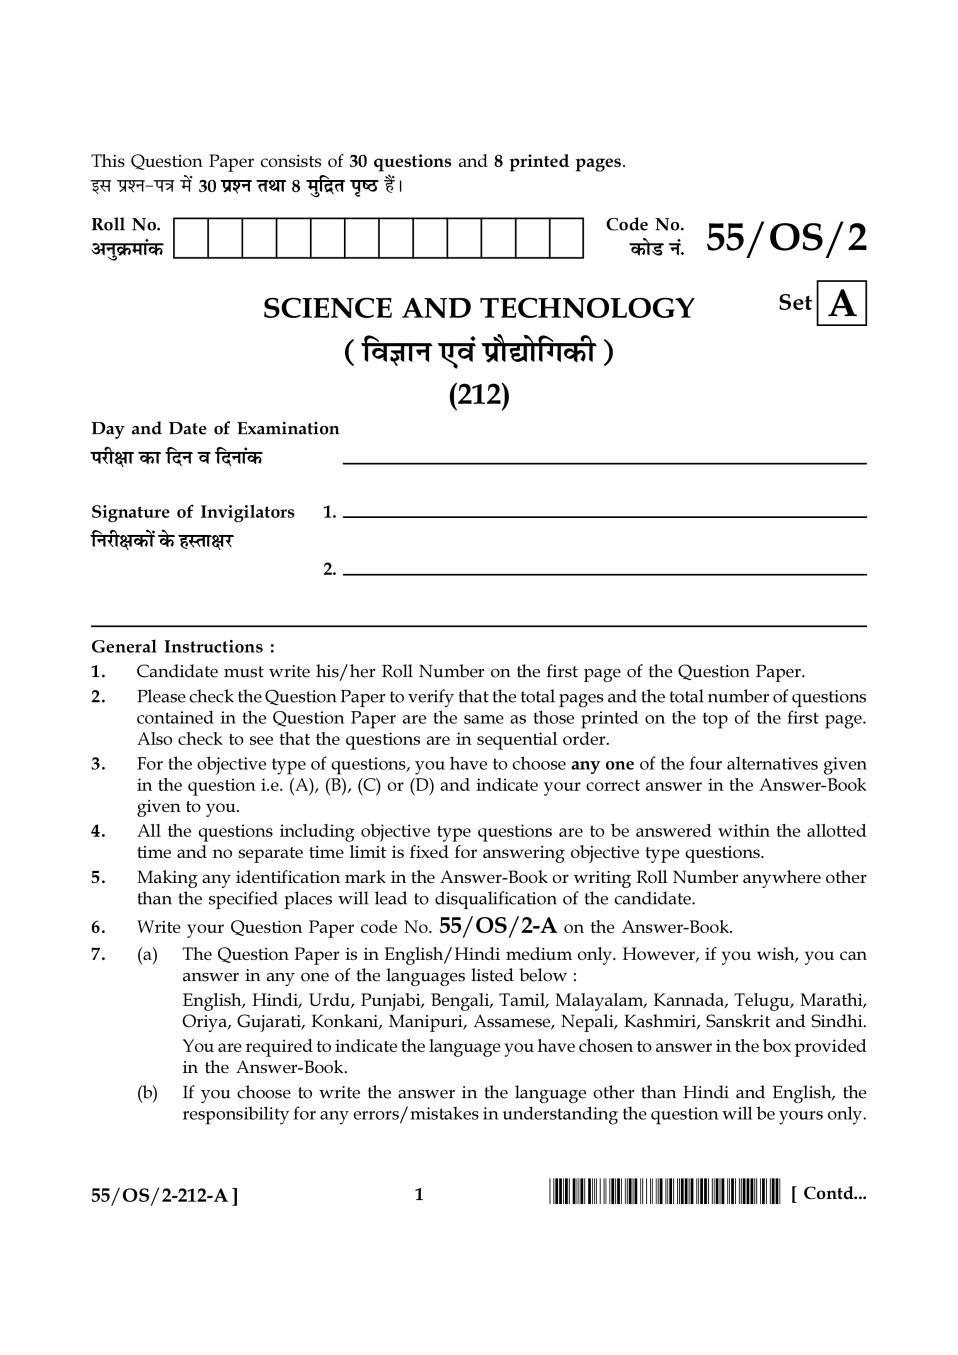 NIOS Class 10 Question Paper Oct 2017 - Science and Technology - Page 1